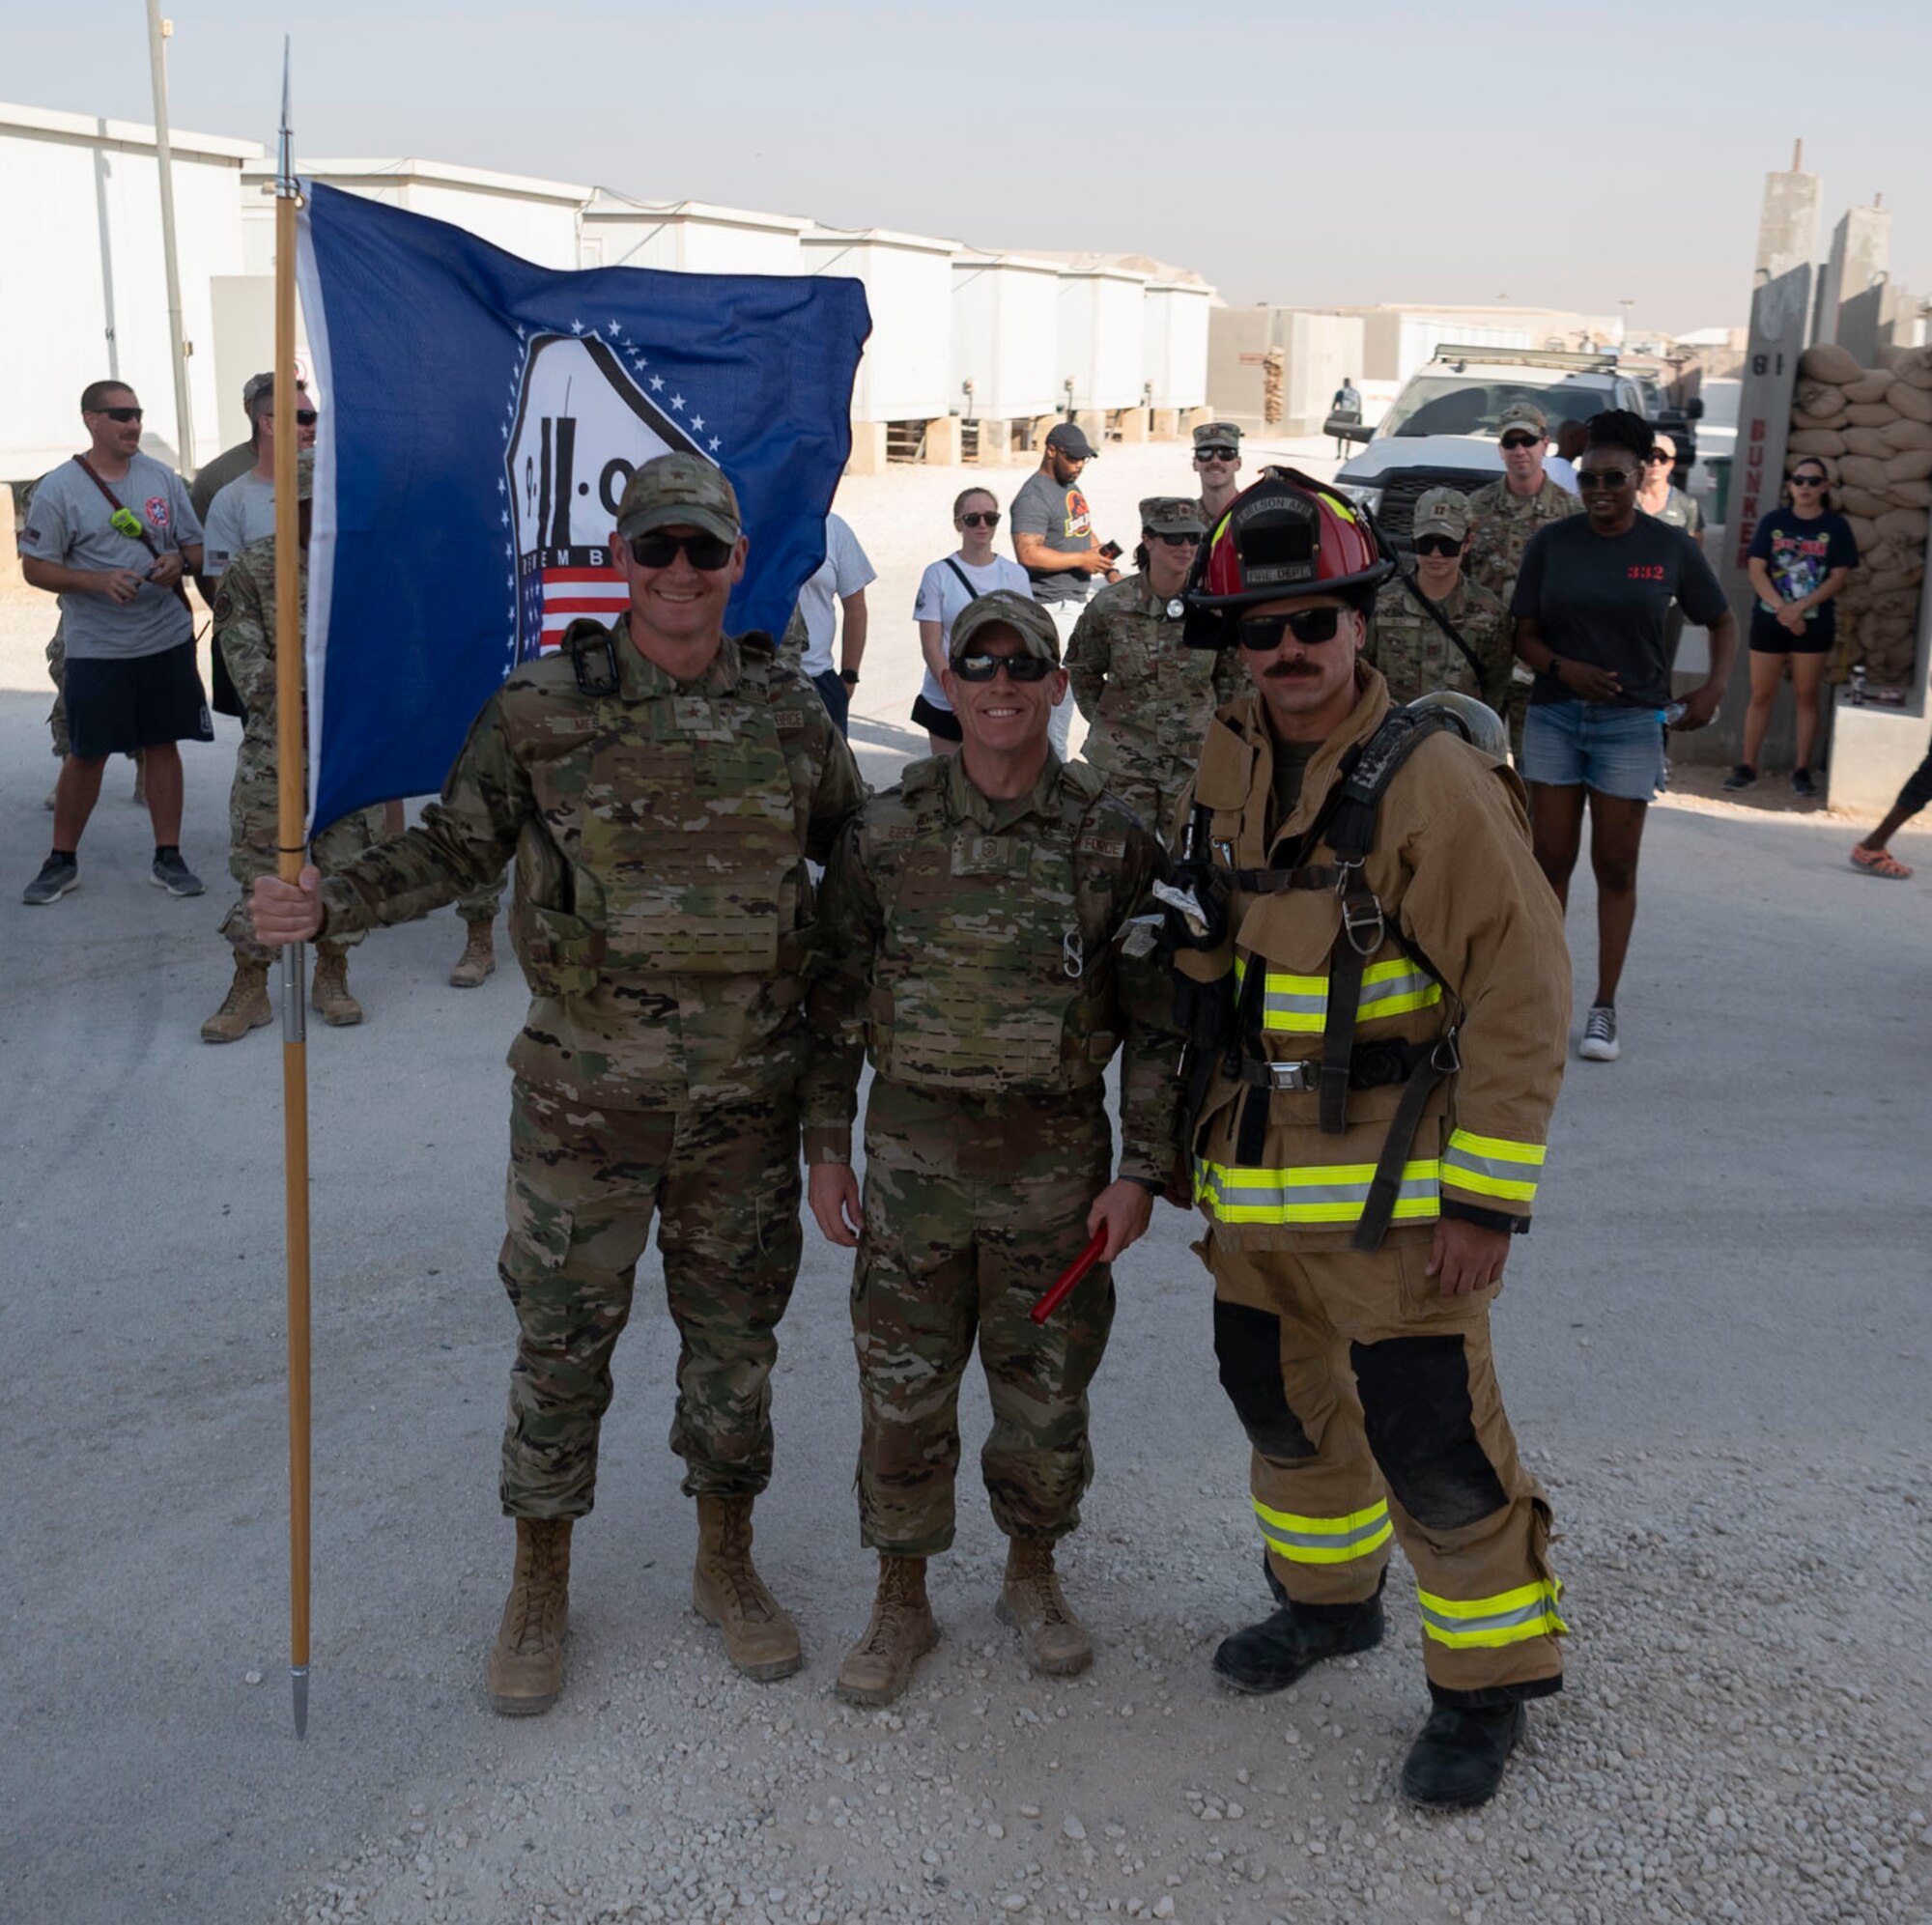 The 332d Air Expeditionary Wing honors those lives lost during the September 11 terrorist attacks in 2001. The 332d AEW held a 24 hour stair climb, the “Run to Remember” 5k, an unveiling of a 9/11 themed T-wall, Emergency Services interactive display, a flyover, cookout, 9/11 themed movie night and a memorial ceremony that showed a screening of a documentary  showcasing the sequence of events during the attacks. (U.S. Air Force photo by Tech. Sgt. Jeffery Foster)